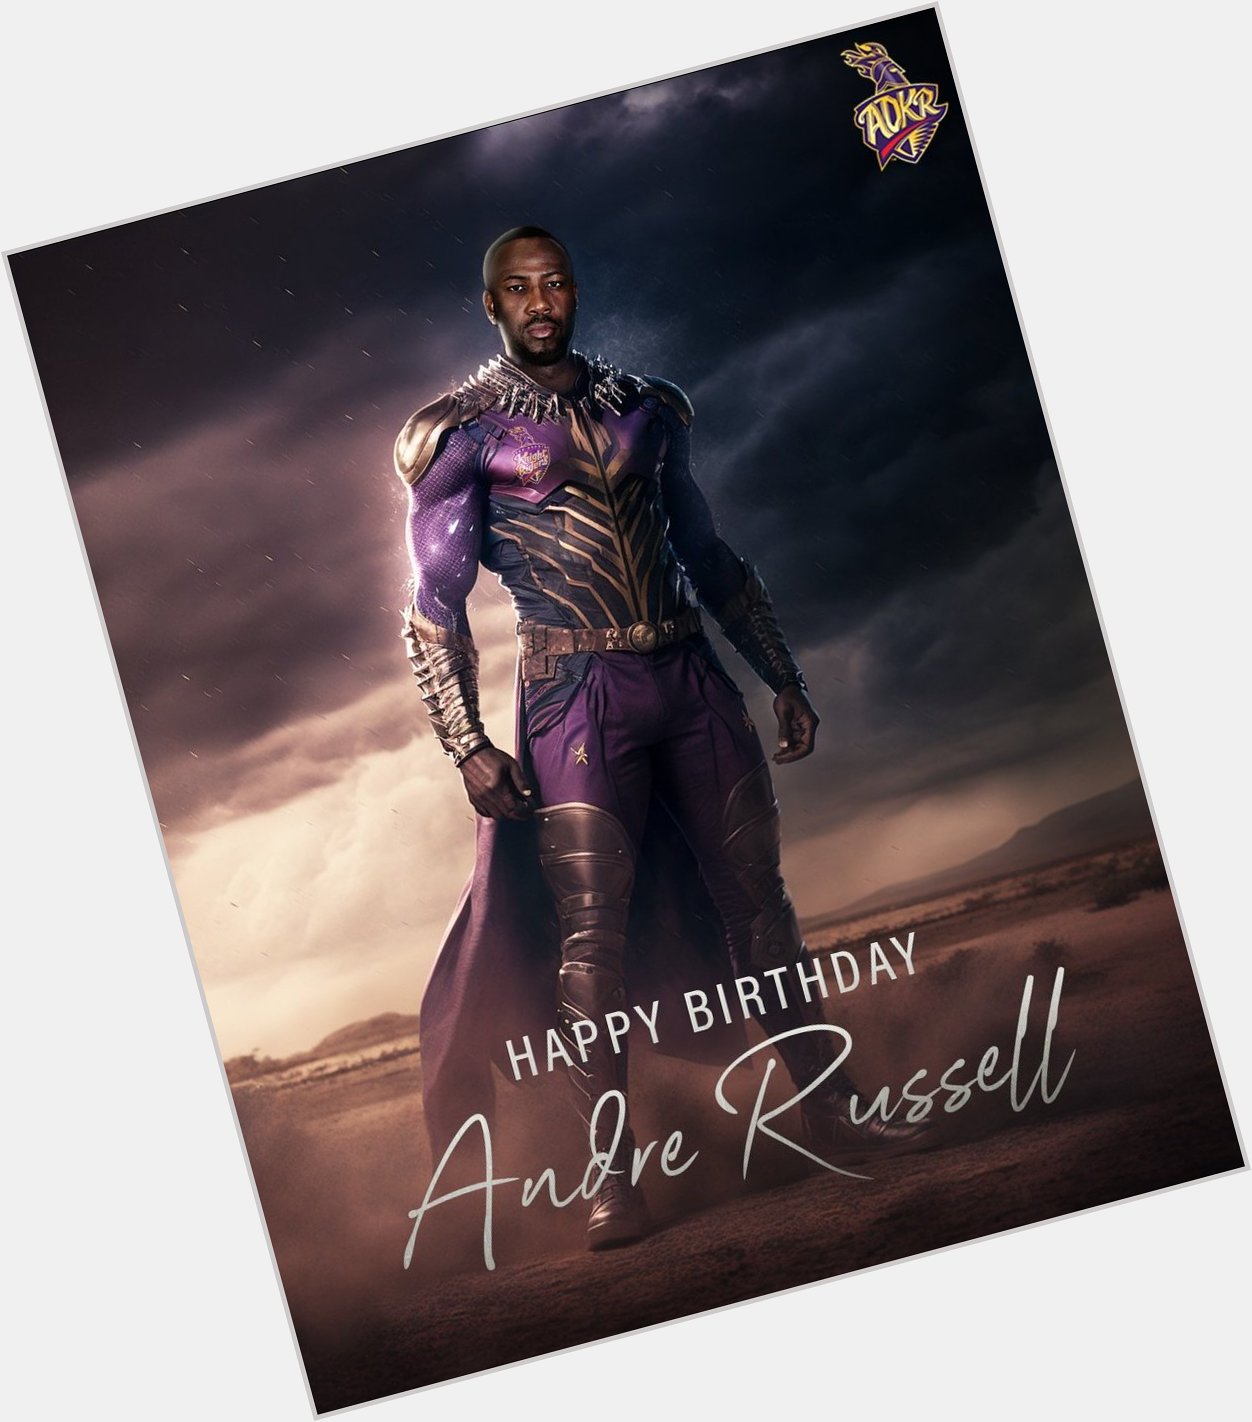 Wishing our knight, Andre Russell a very happy birthday!   